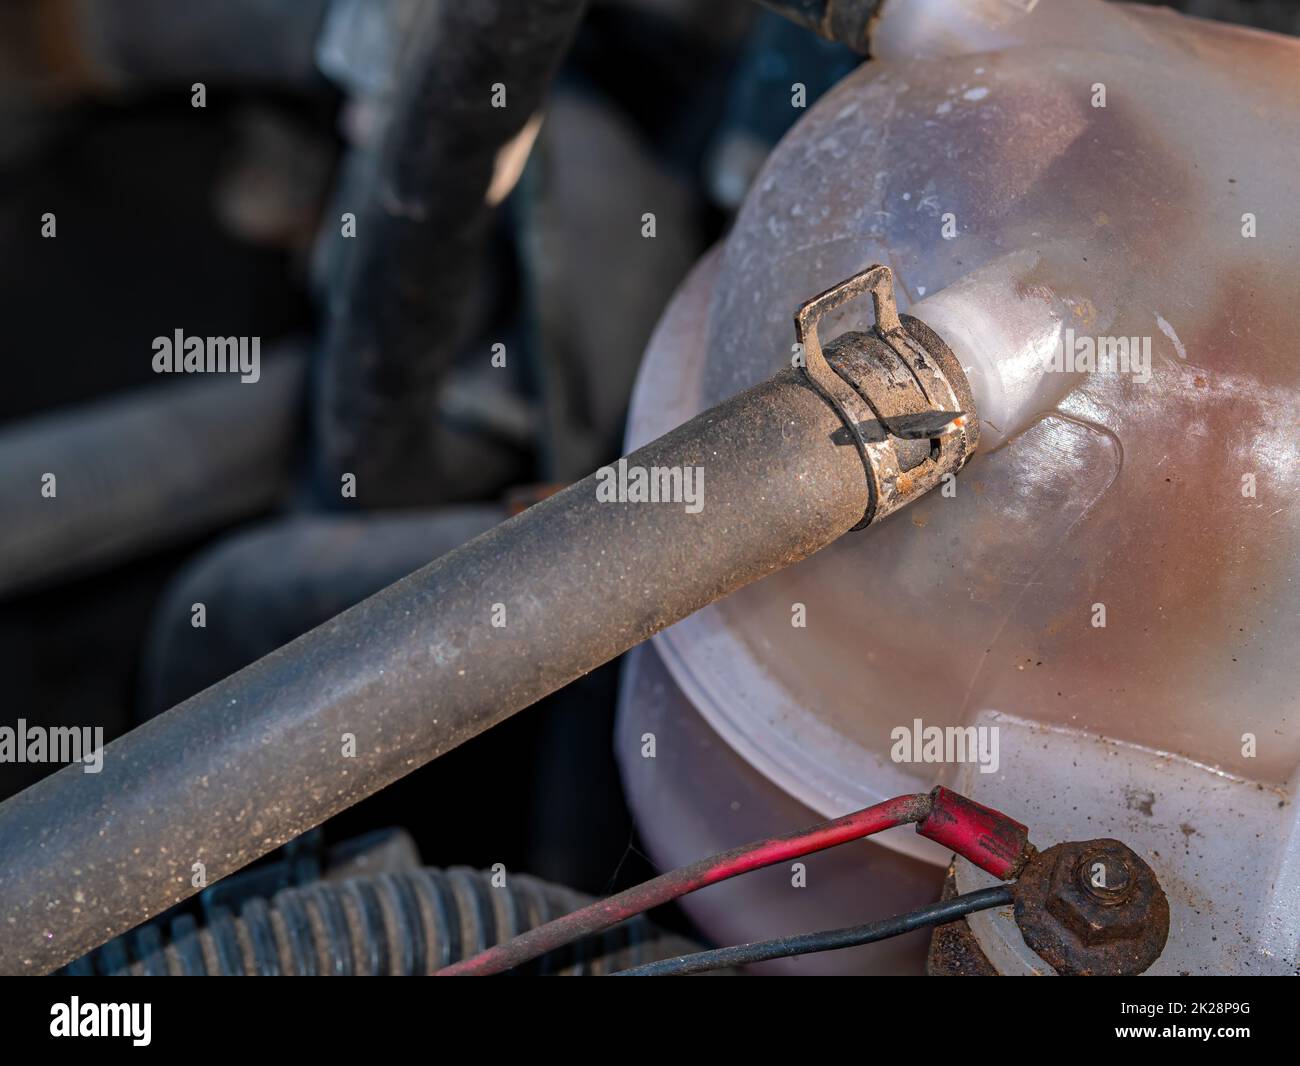 Metal clamp for fastening the rubber hose of the plastic tank of the car's coolant. Stock Photo